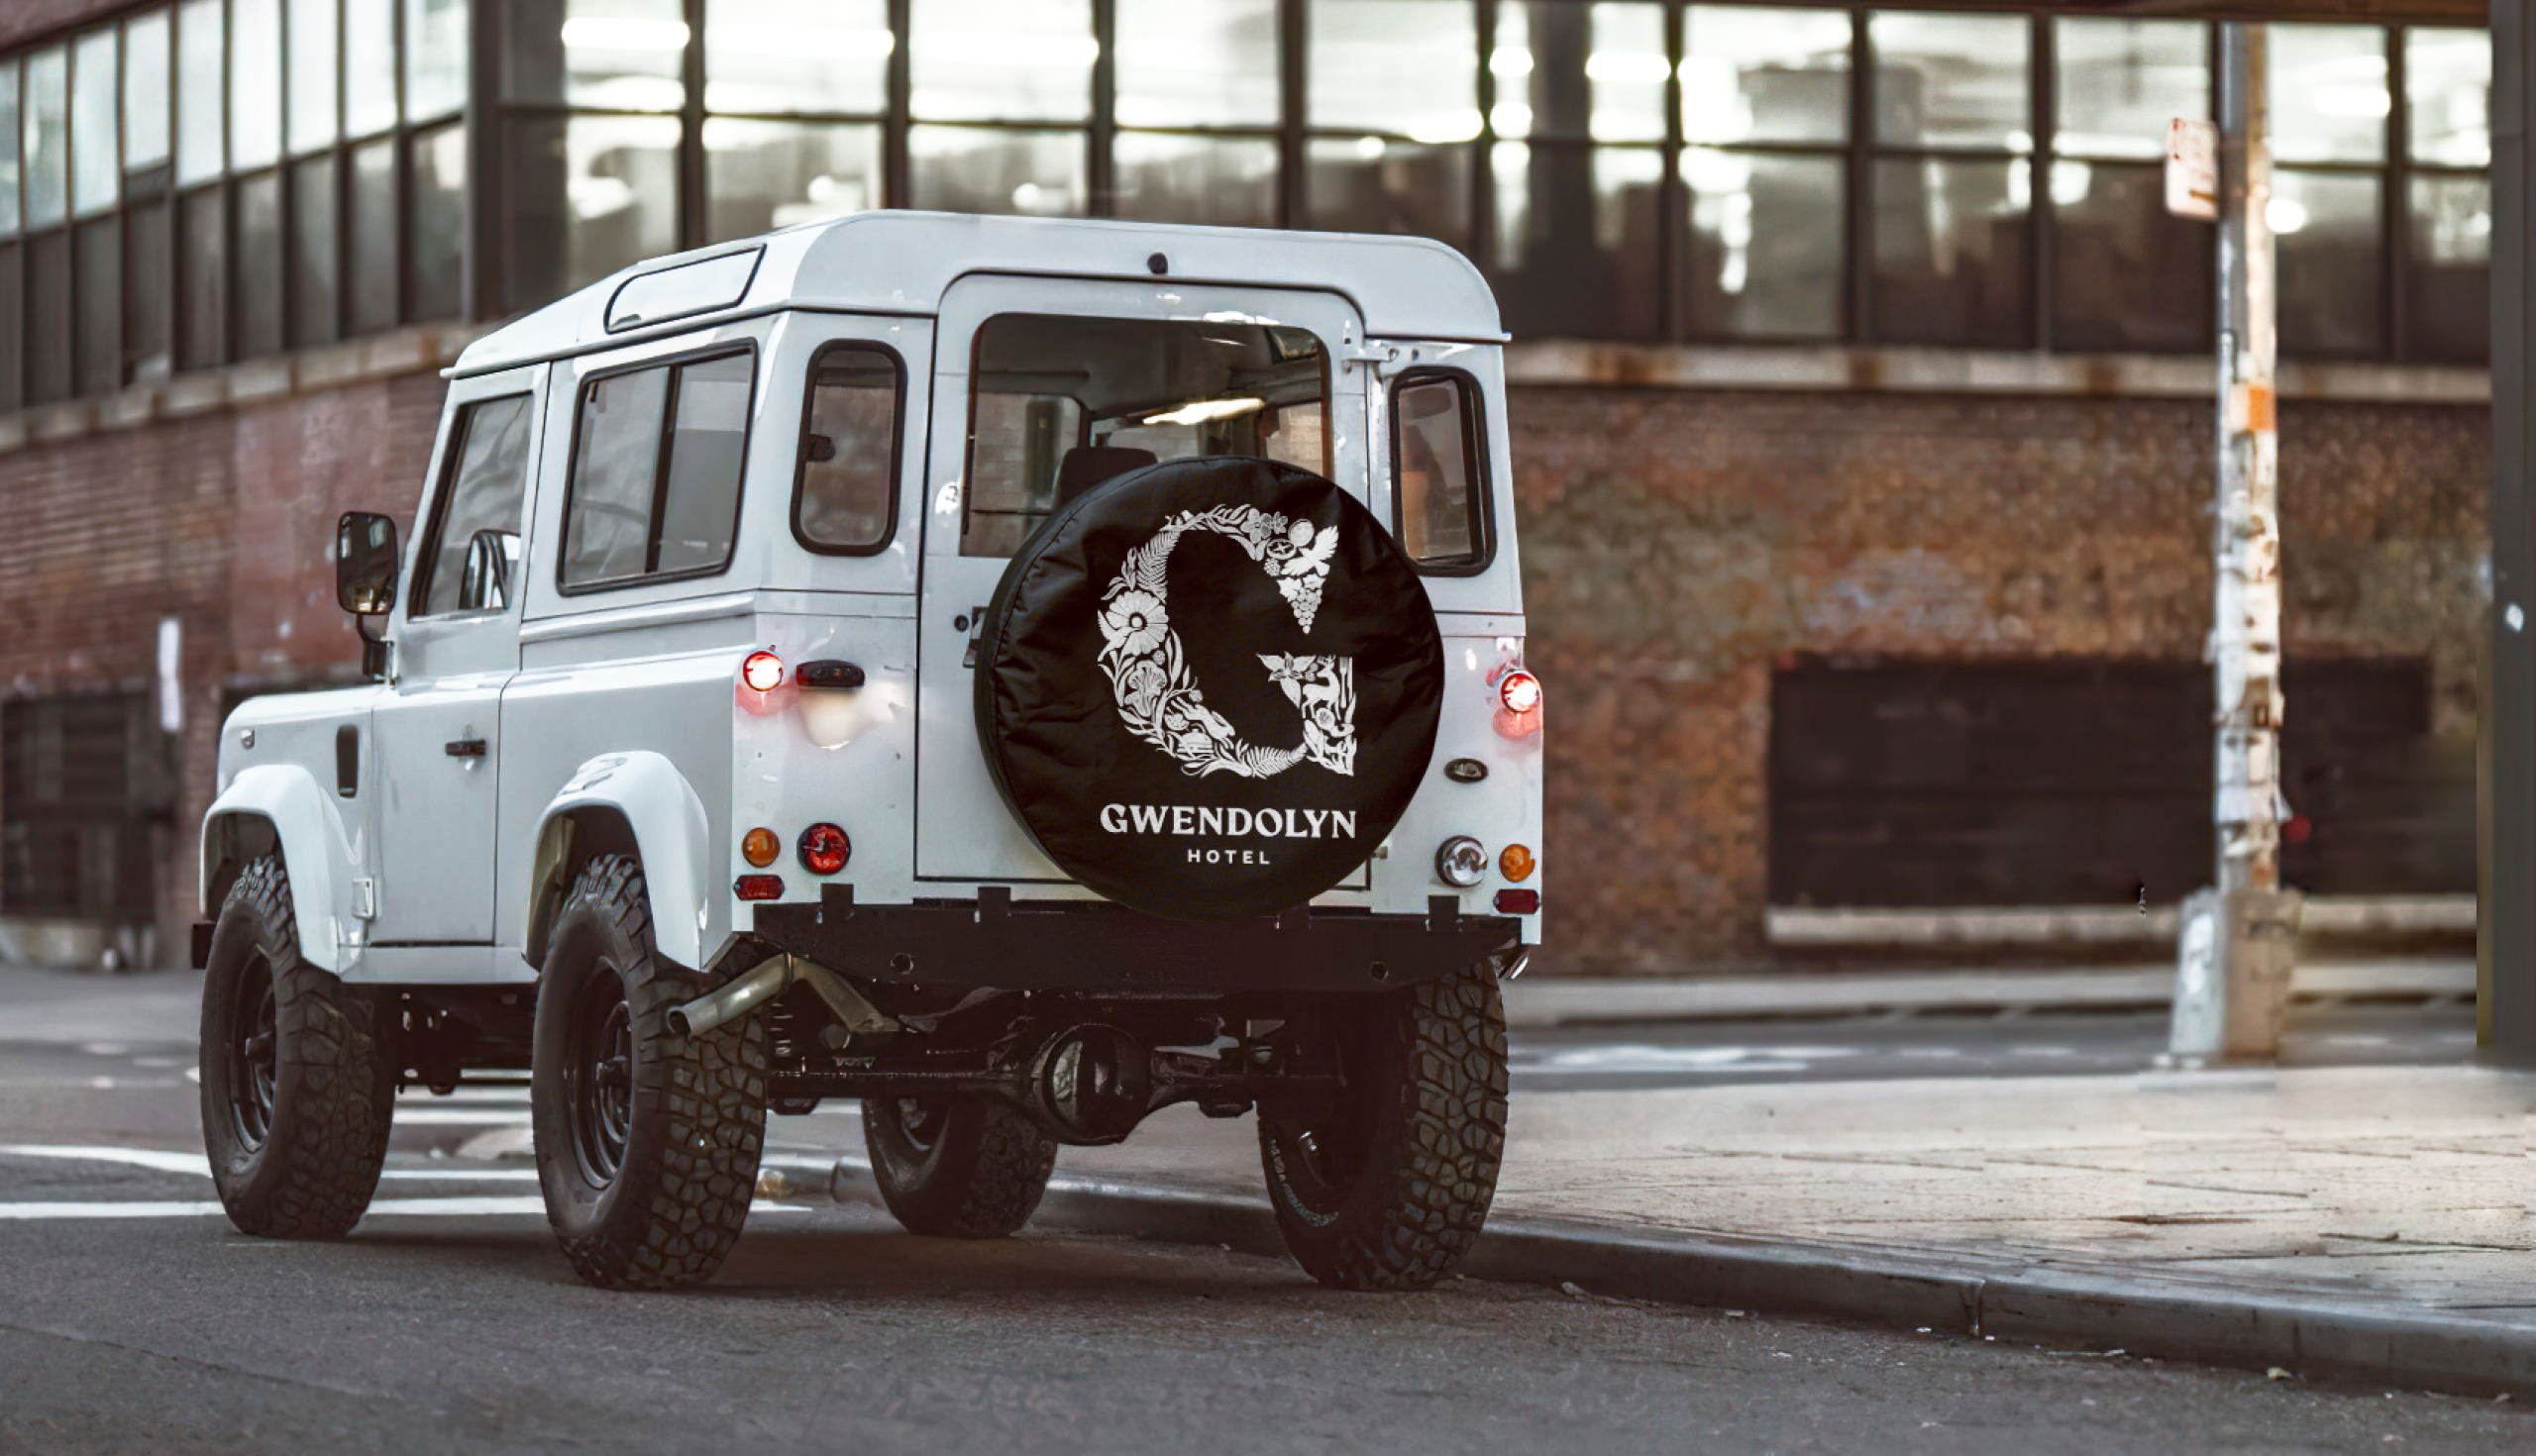 White Land Rover truck with Gwendolyn logo on spare tire cover